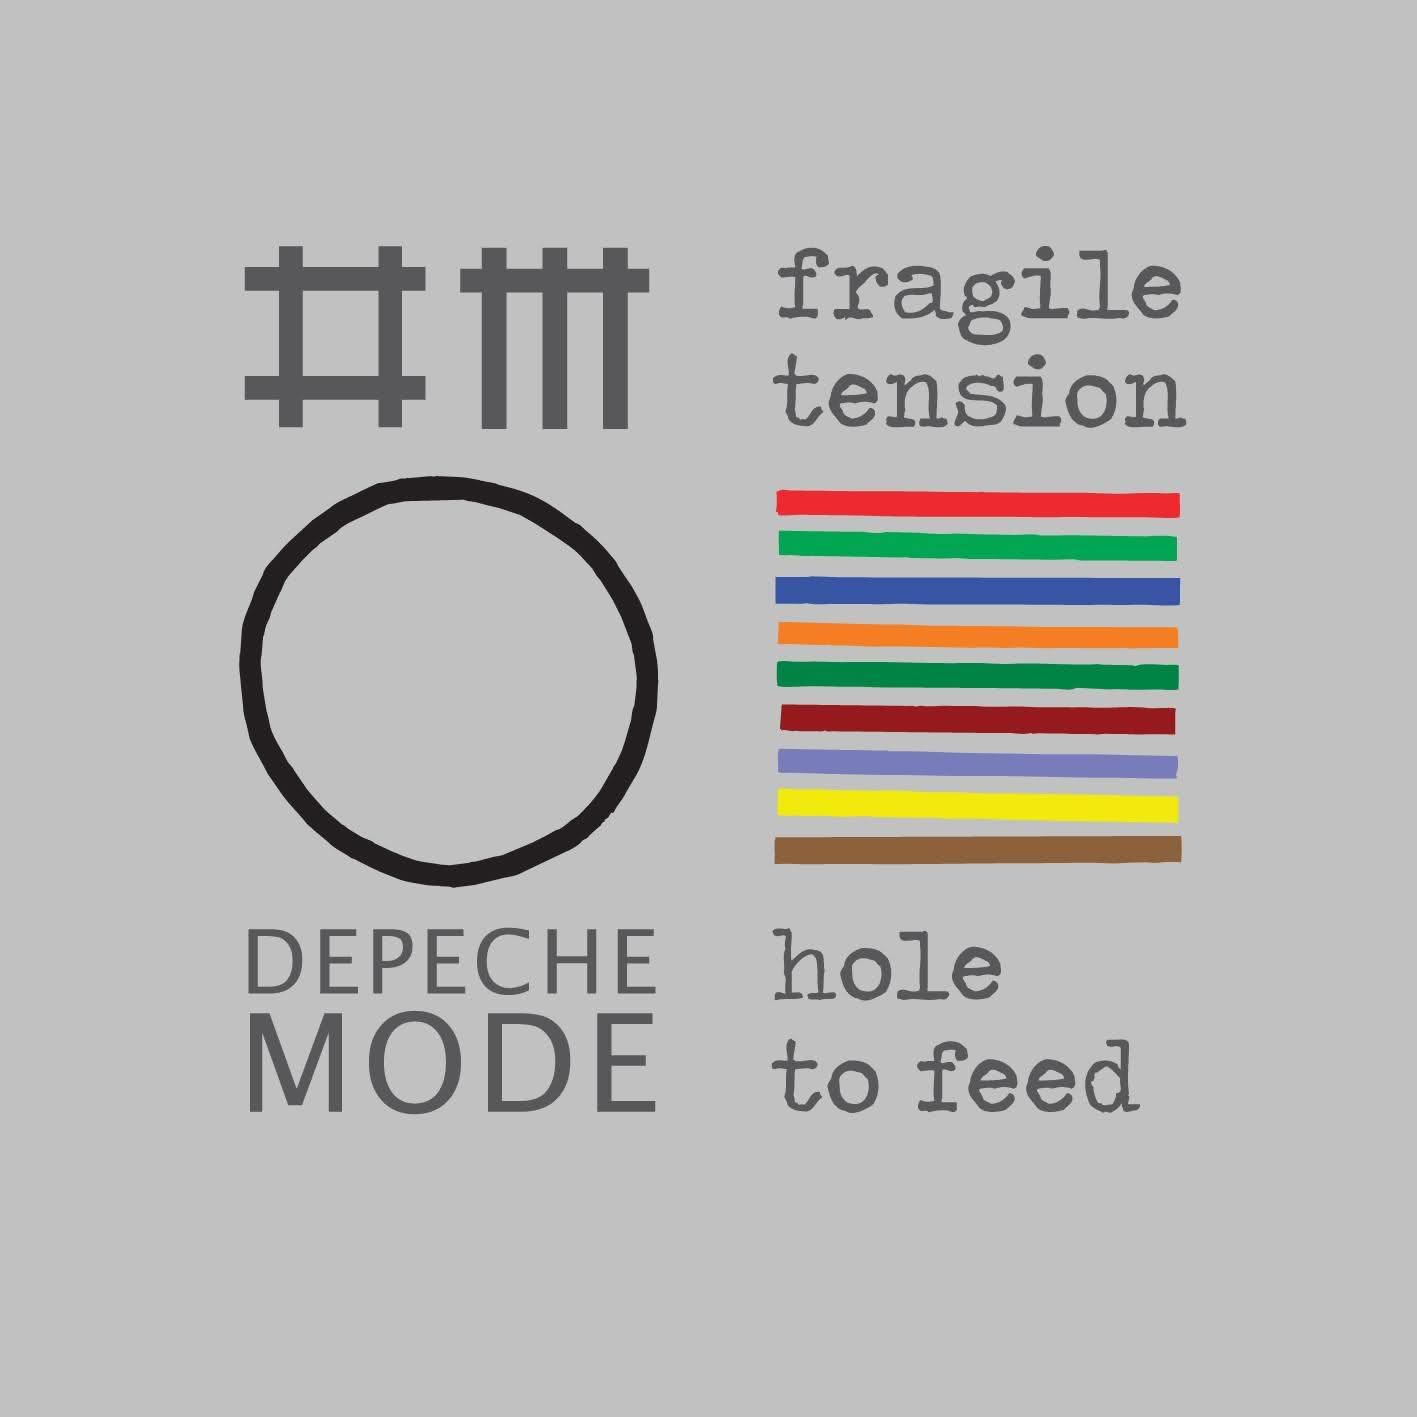 image cover: Depeche Mode - Fragile Tension Hole To Feed [XBONG42]